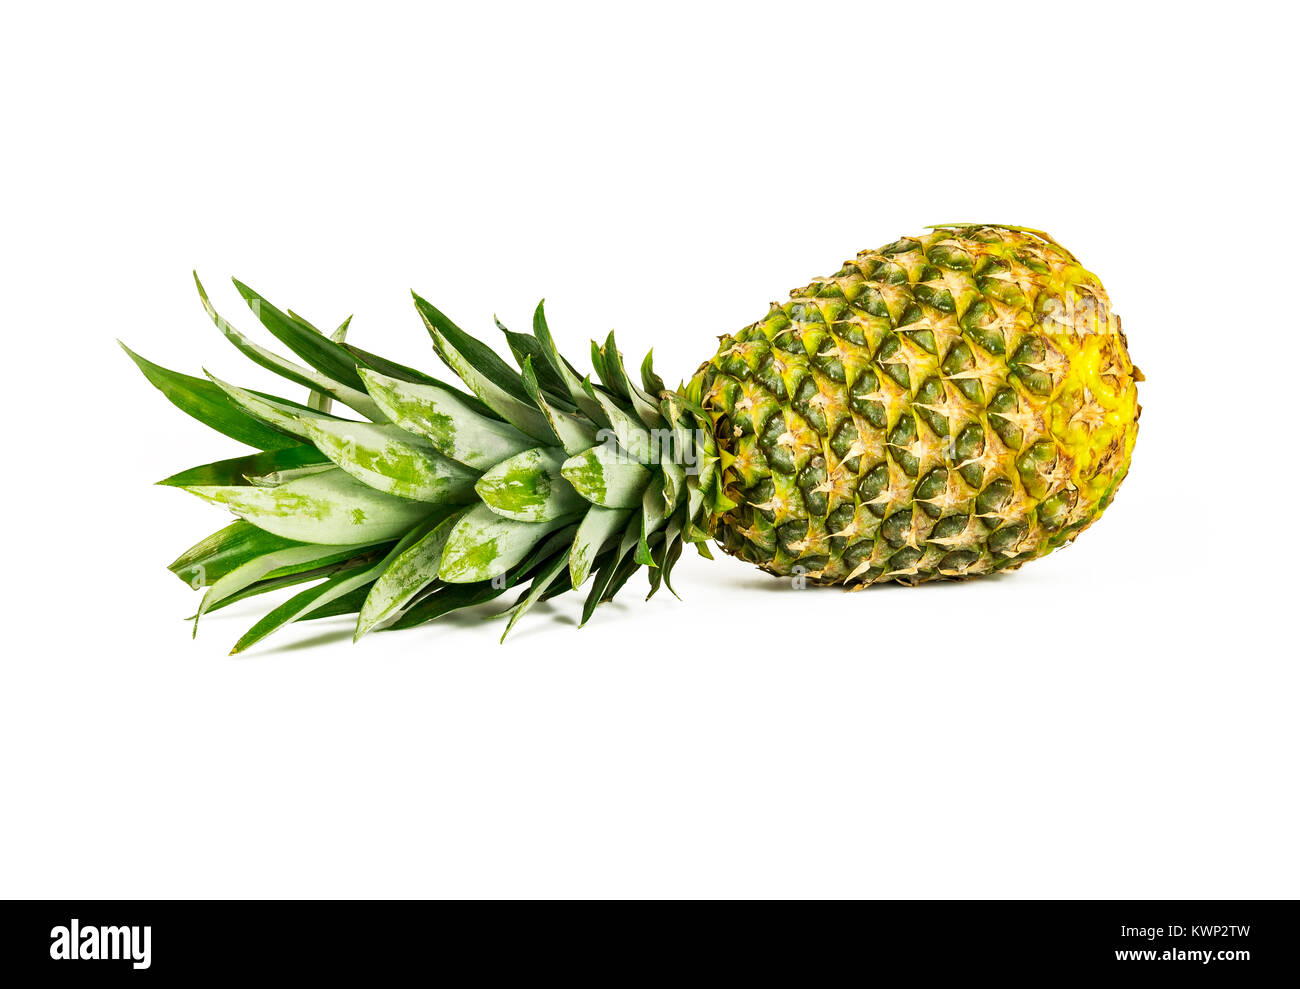 On a white background is a large ripe pineapple Stock Photo